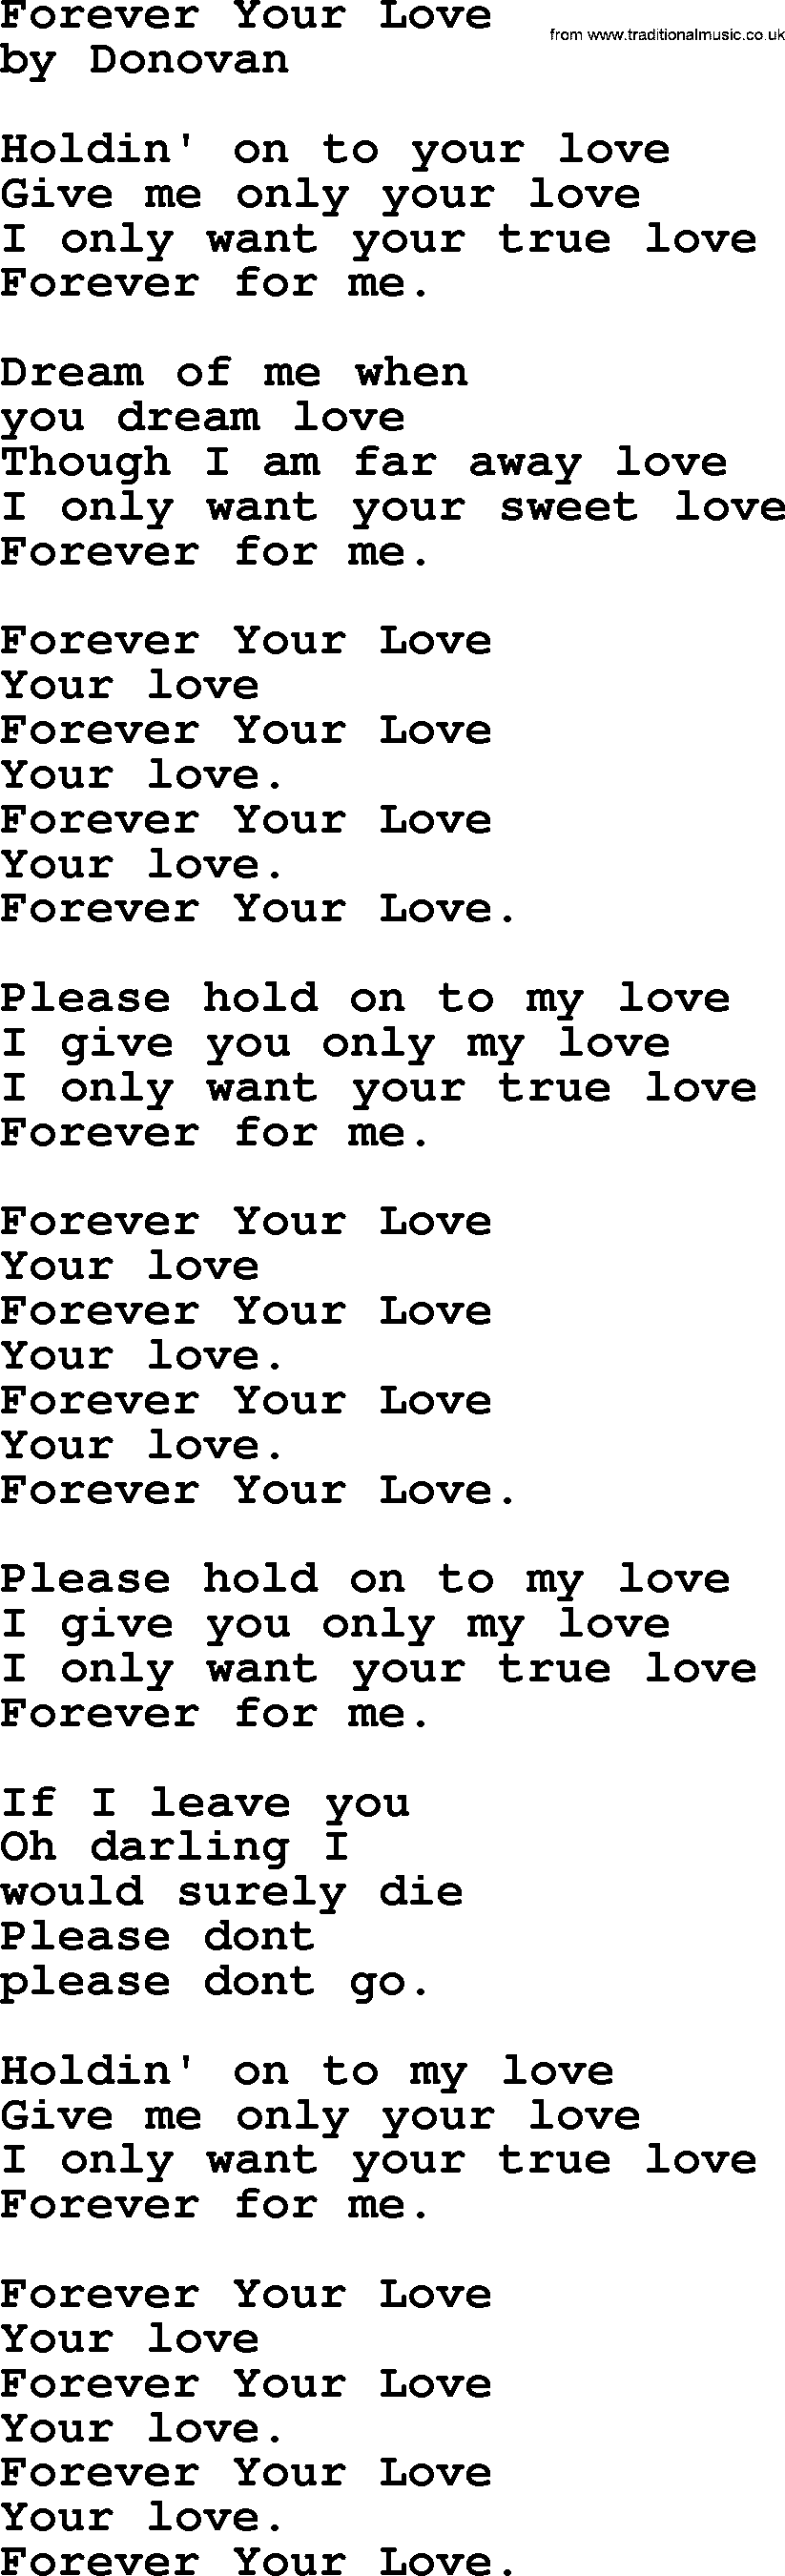 Donovan Leitch song: Forever Your Love lyrics